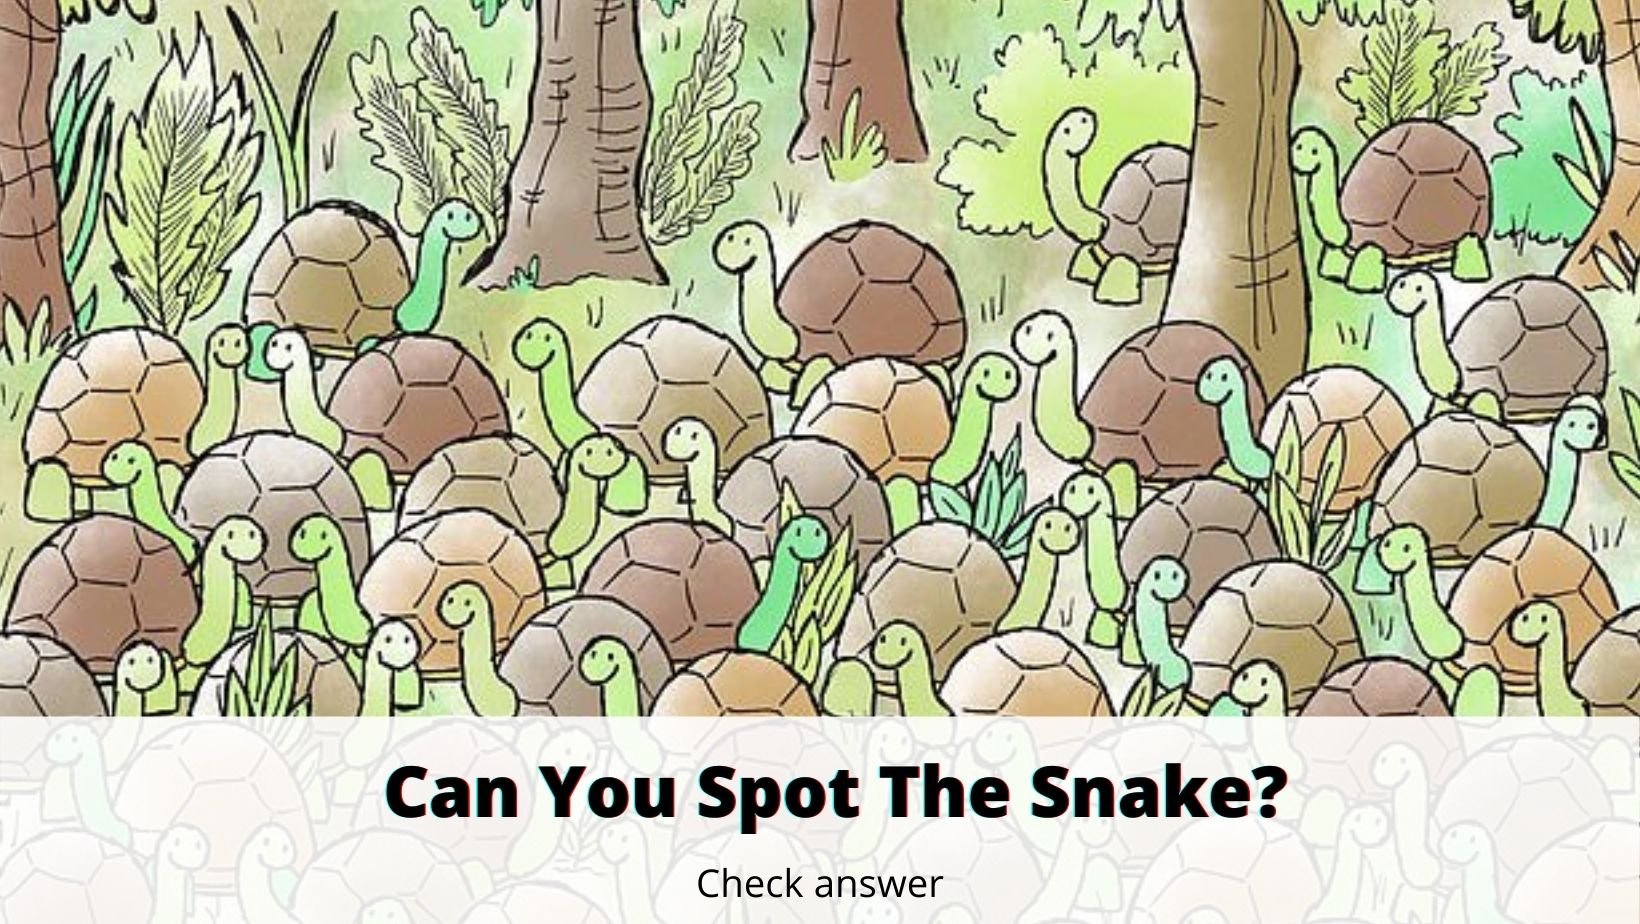 small joys thumbnail 6 2.jpg?resize=1200,630 - Can You Find The Snake Among The Turtles?